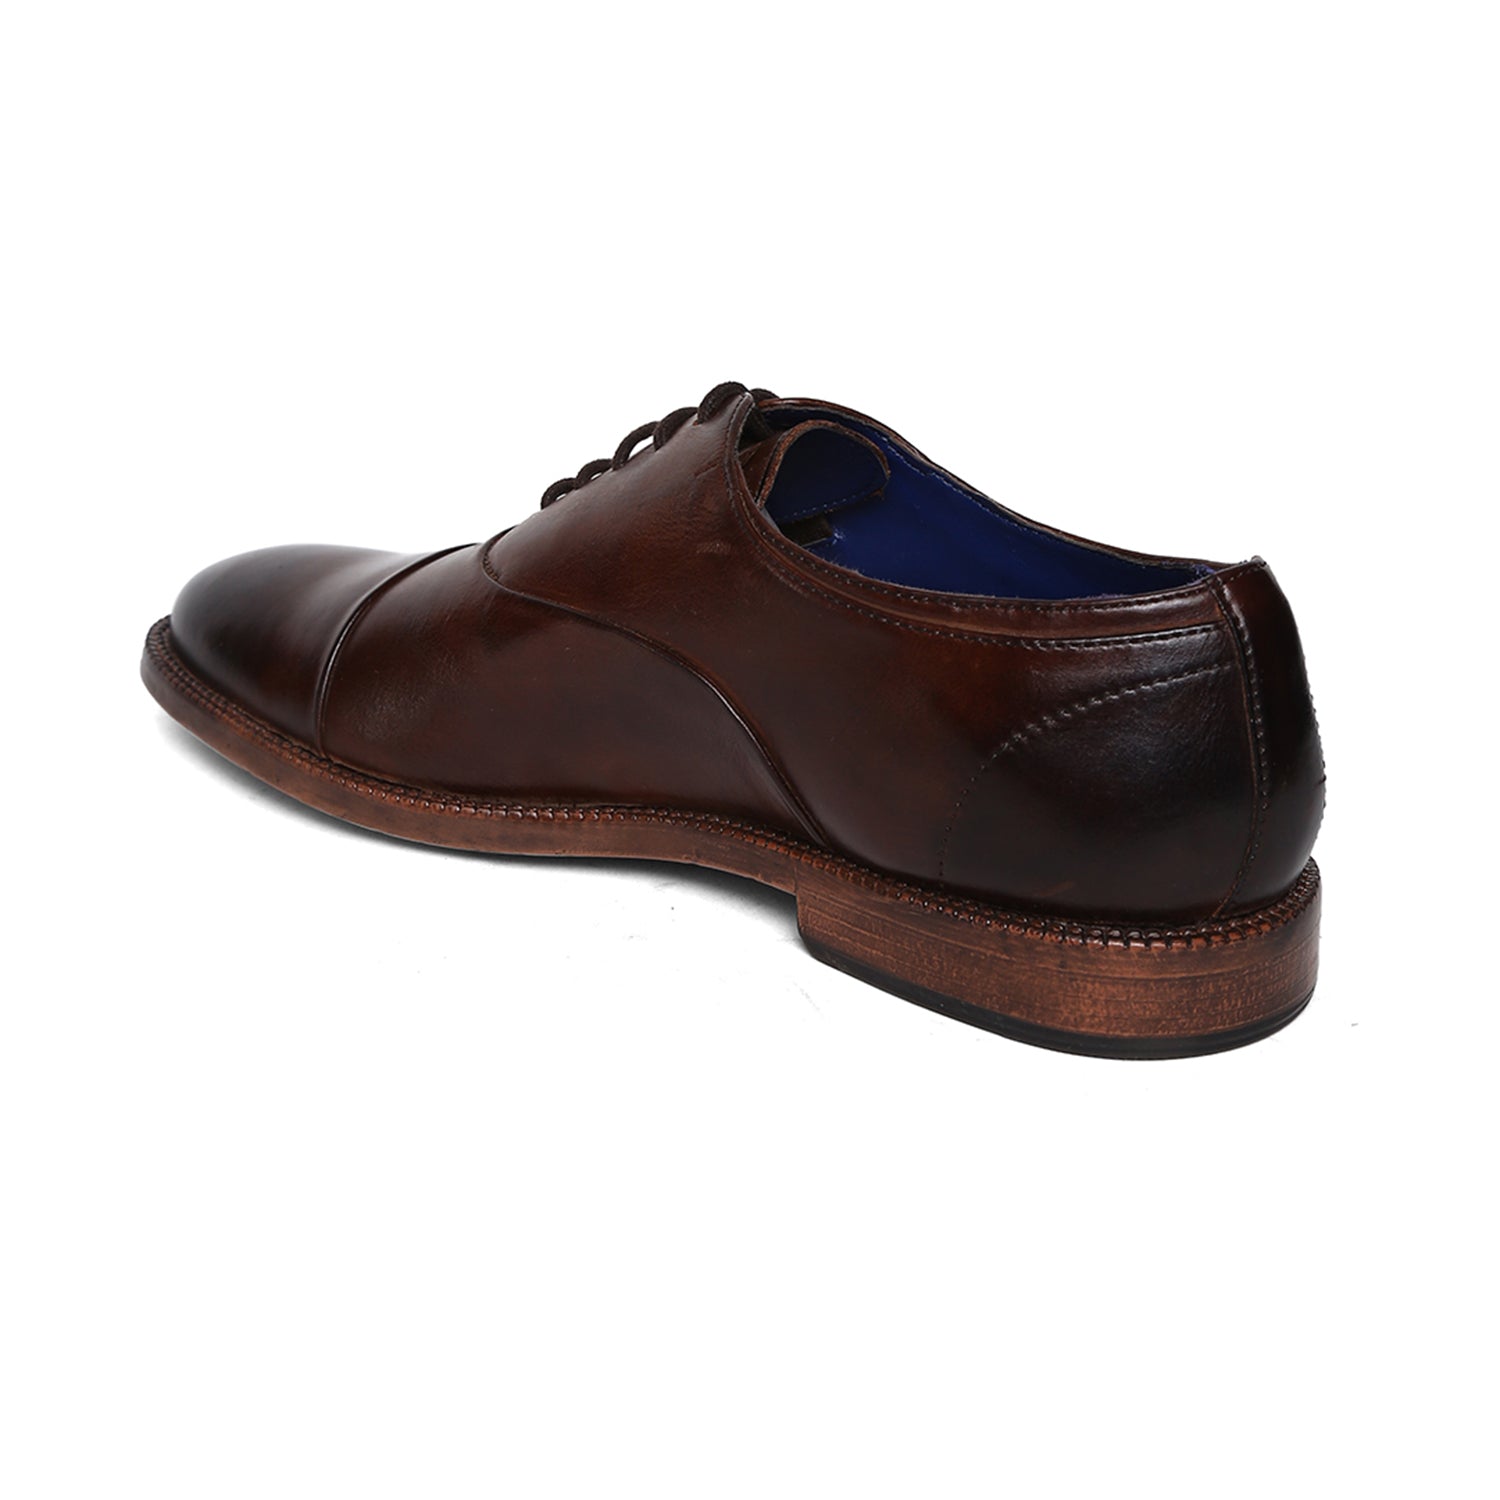 Masabih Genuine Leather Brown Casual Oxford Shoes For Men